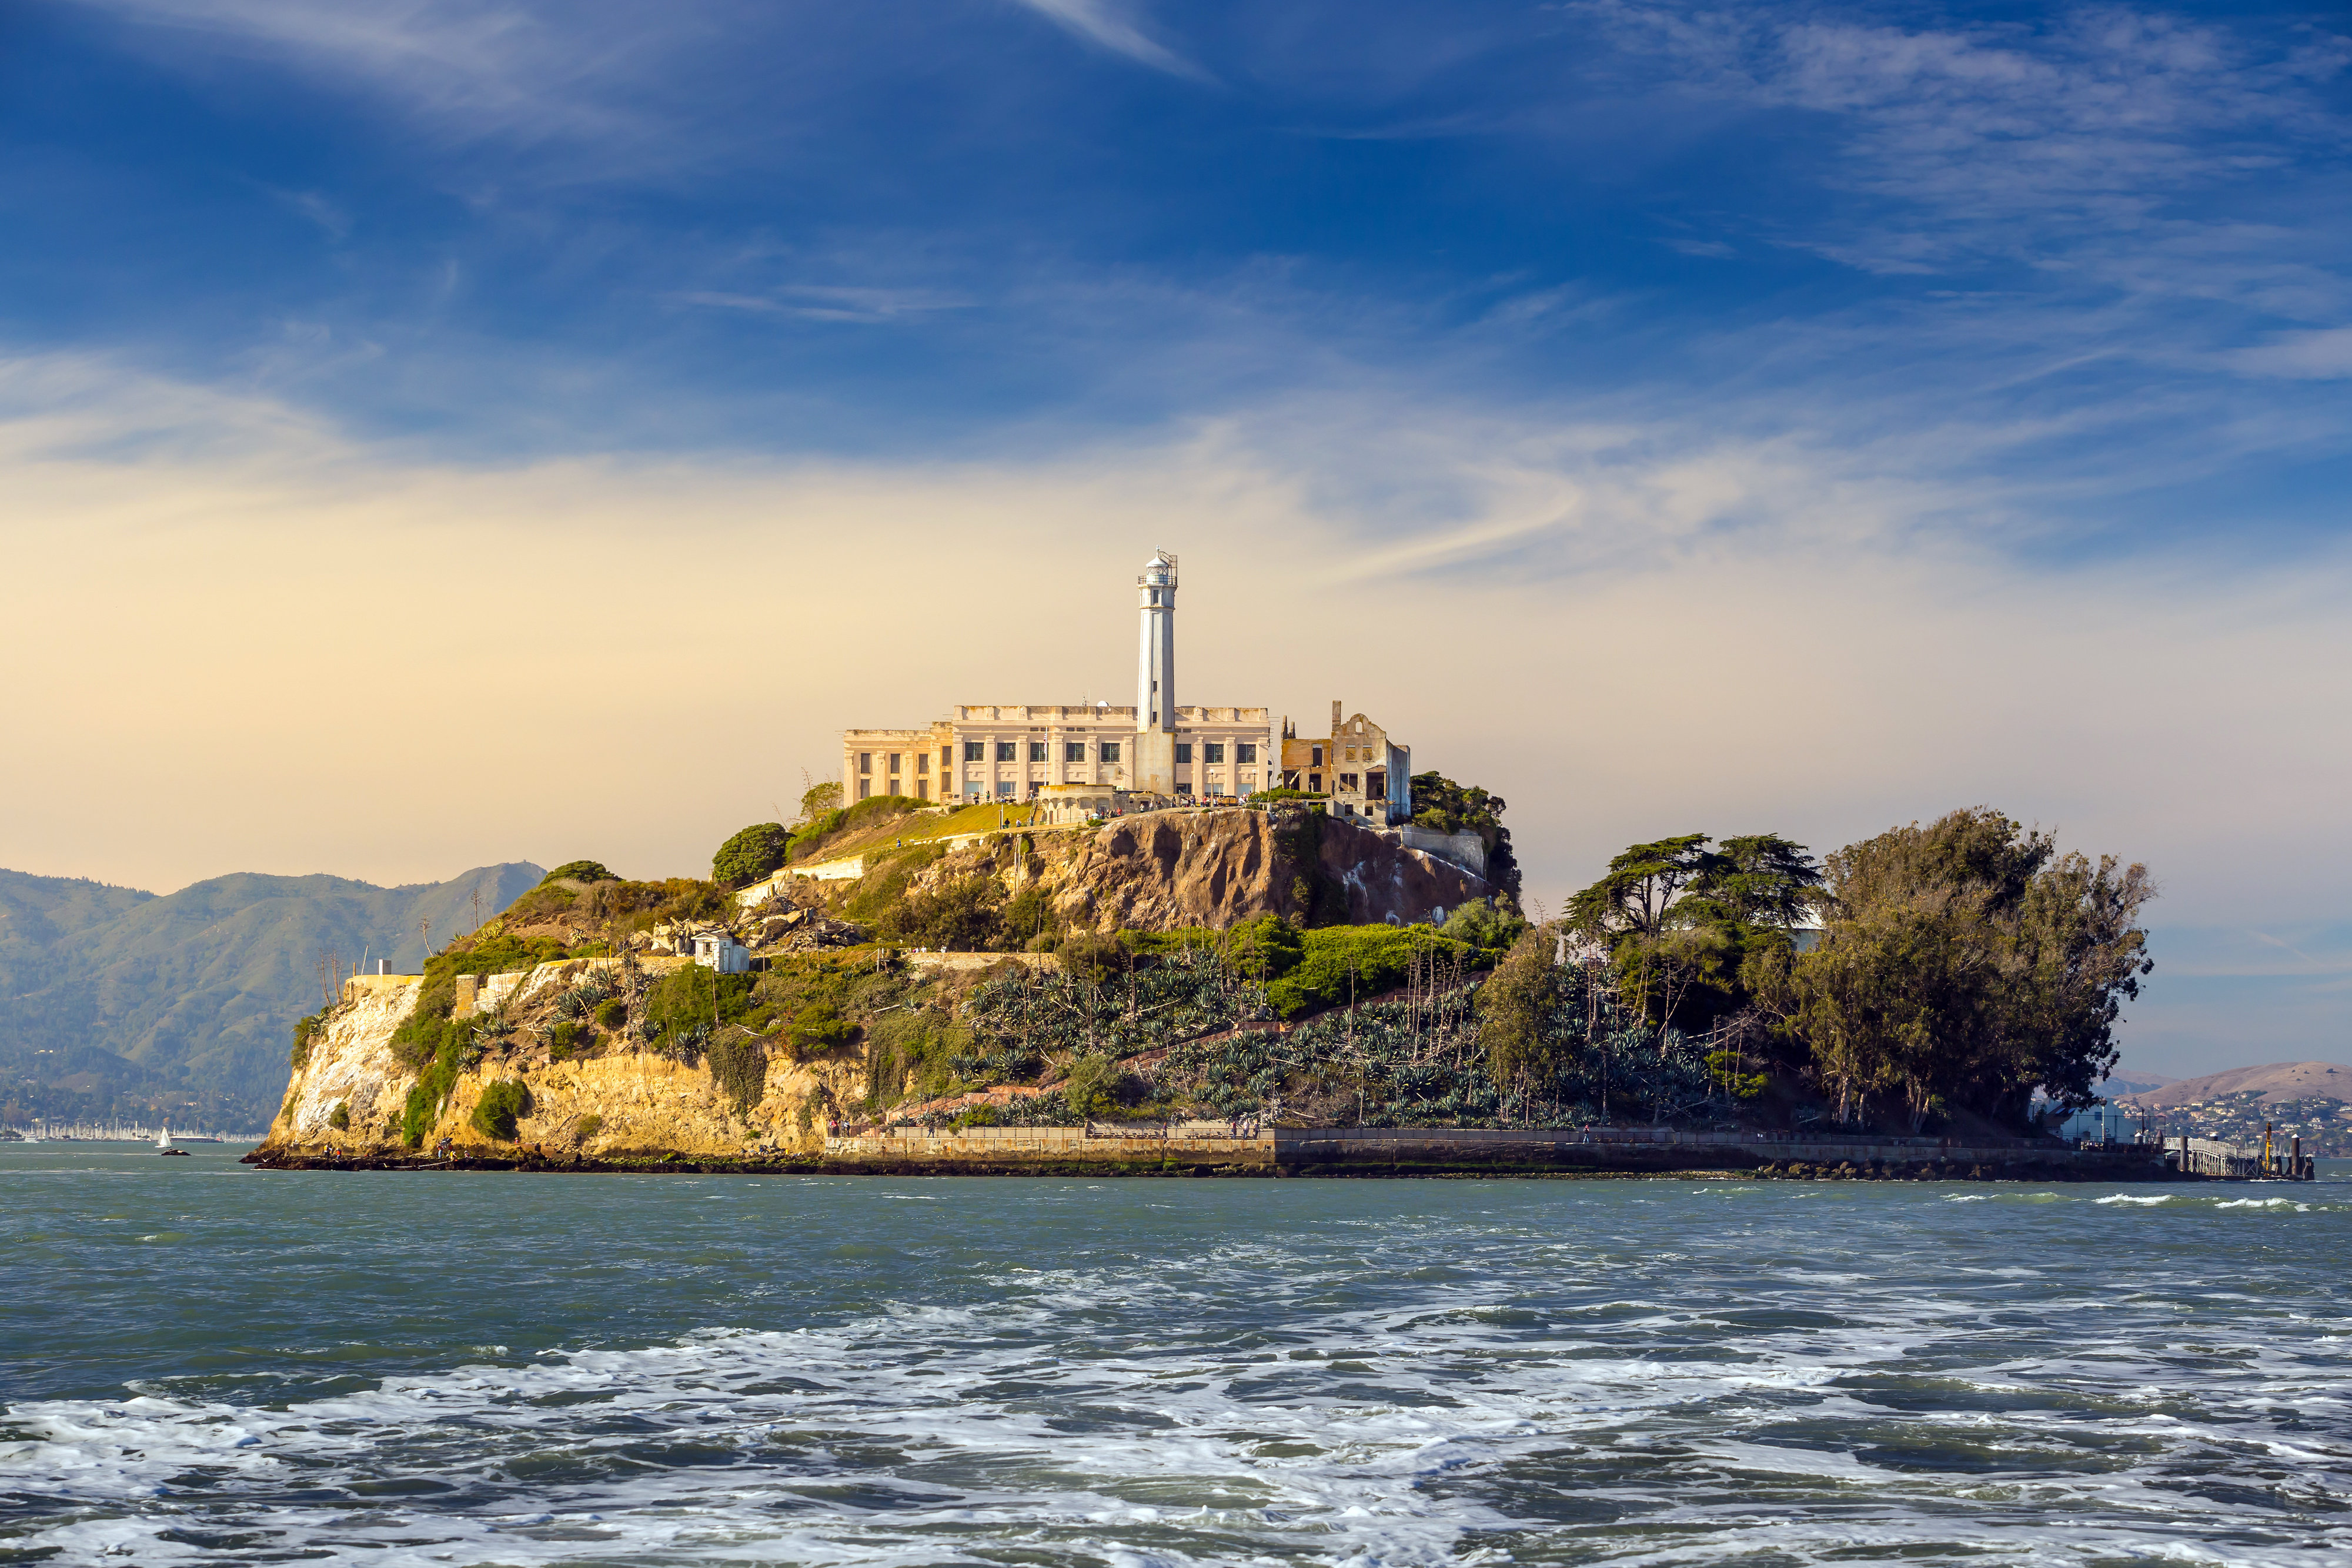 The historic and infamous Alcatraz island and former prison